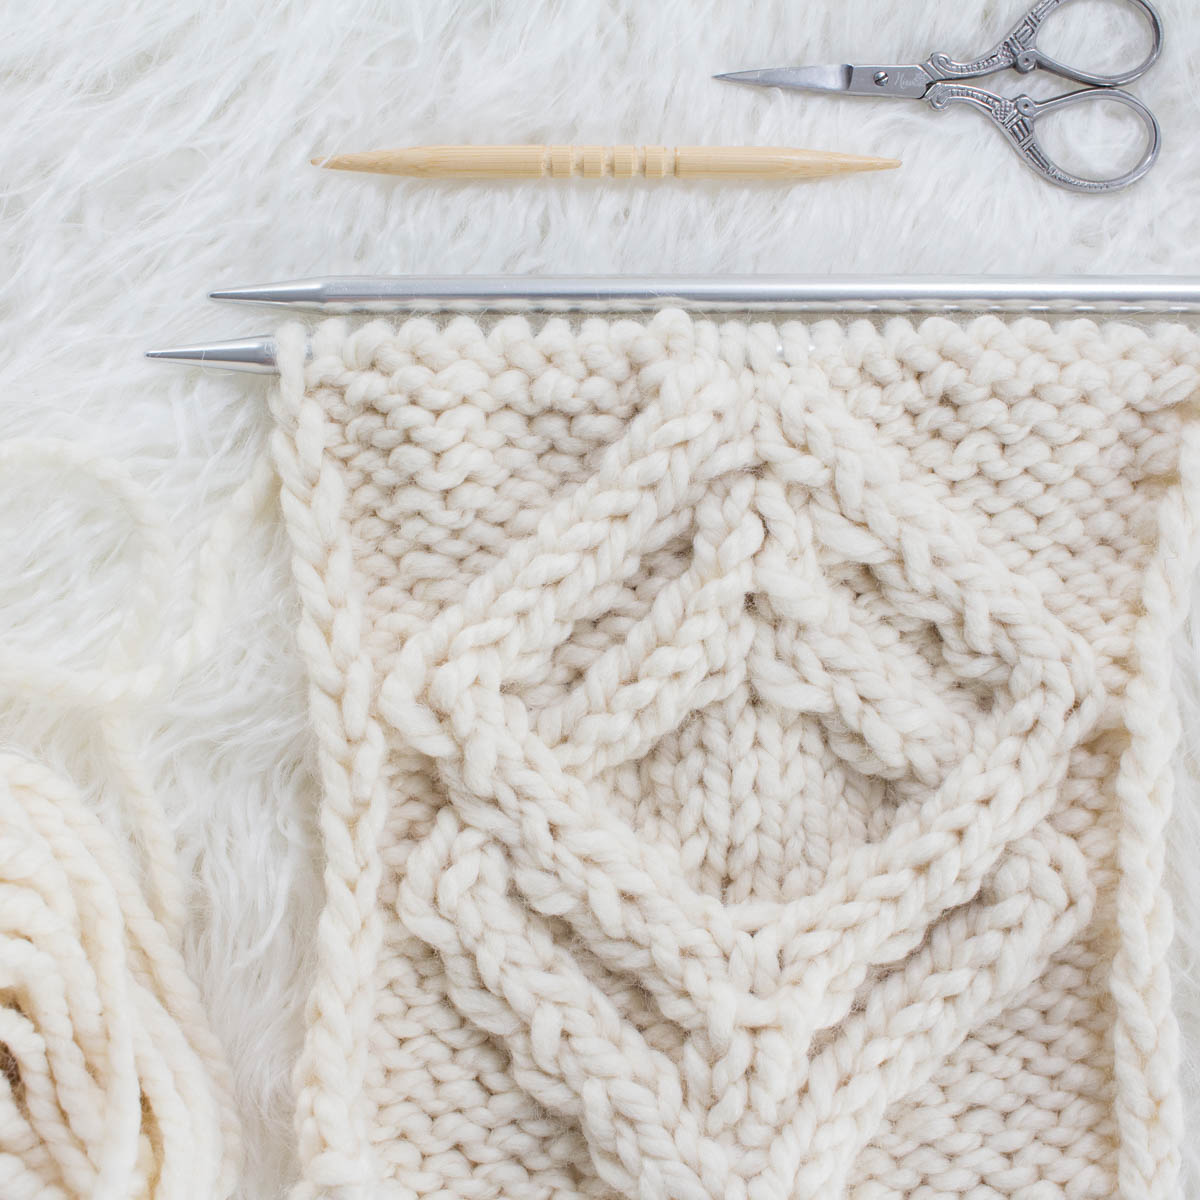 21 Days of Cable Knit Stitches : Brome Fields